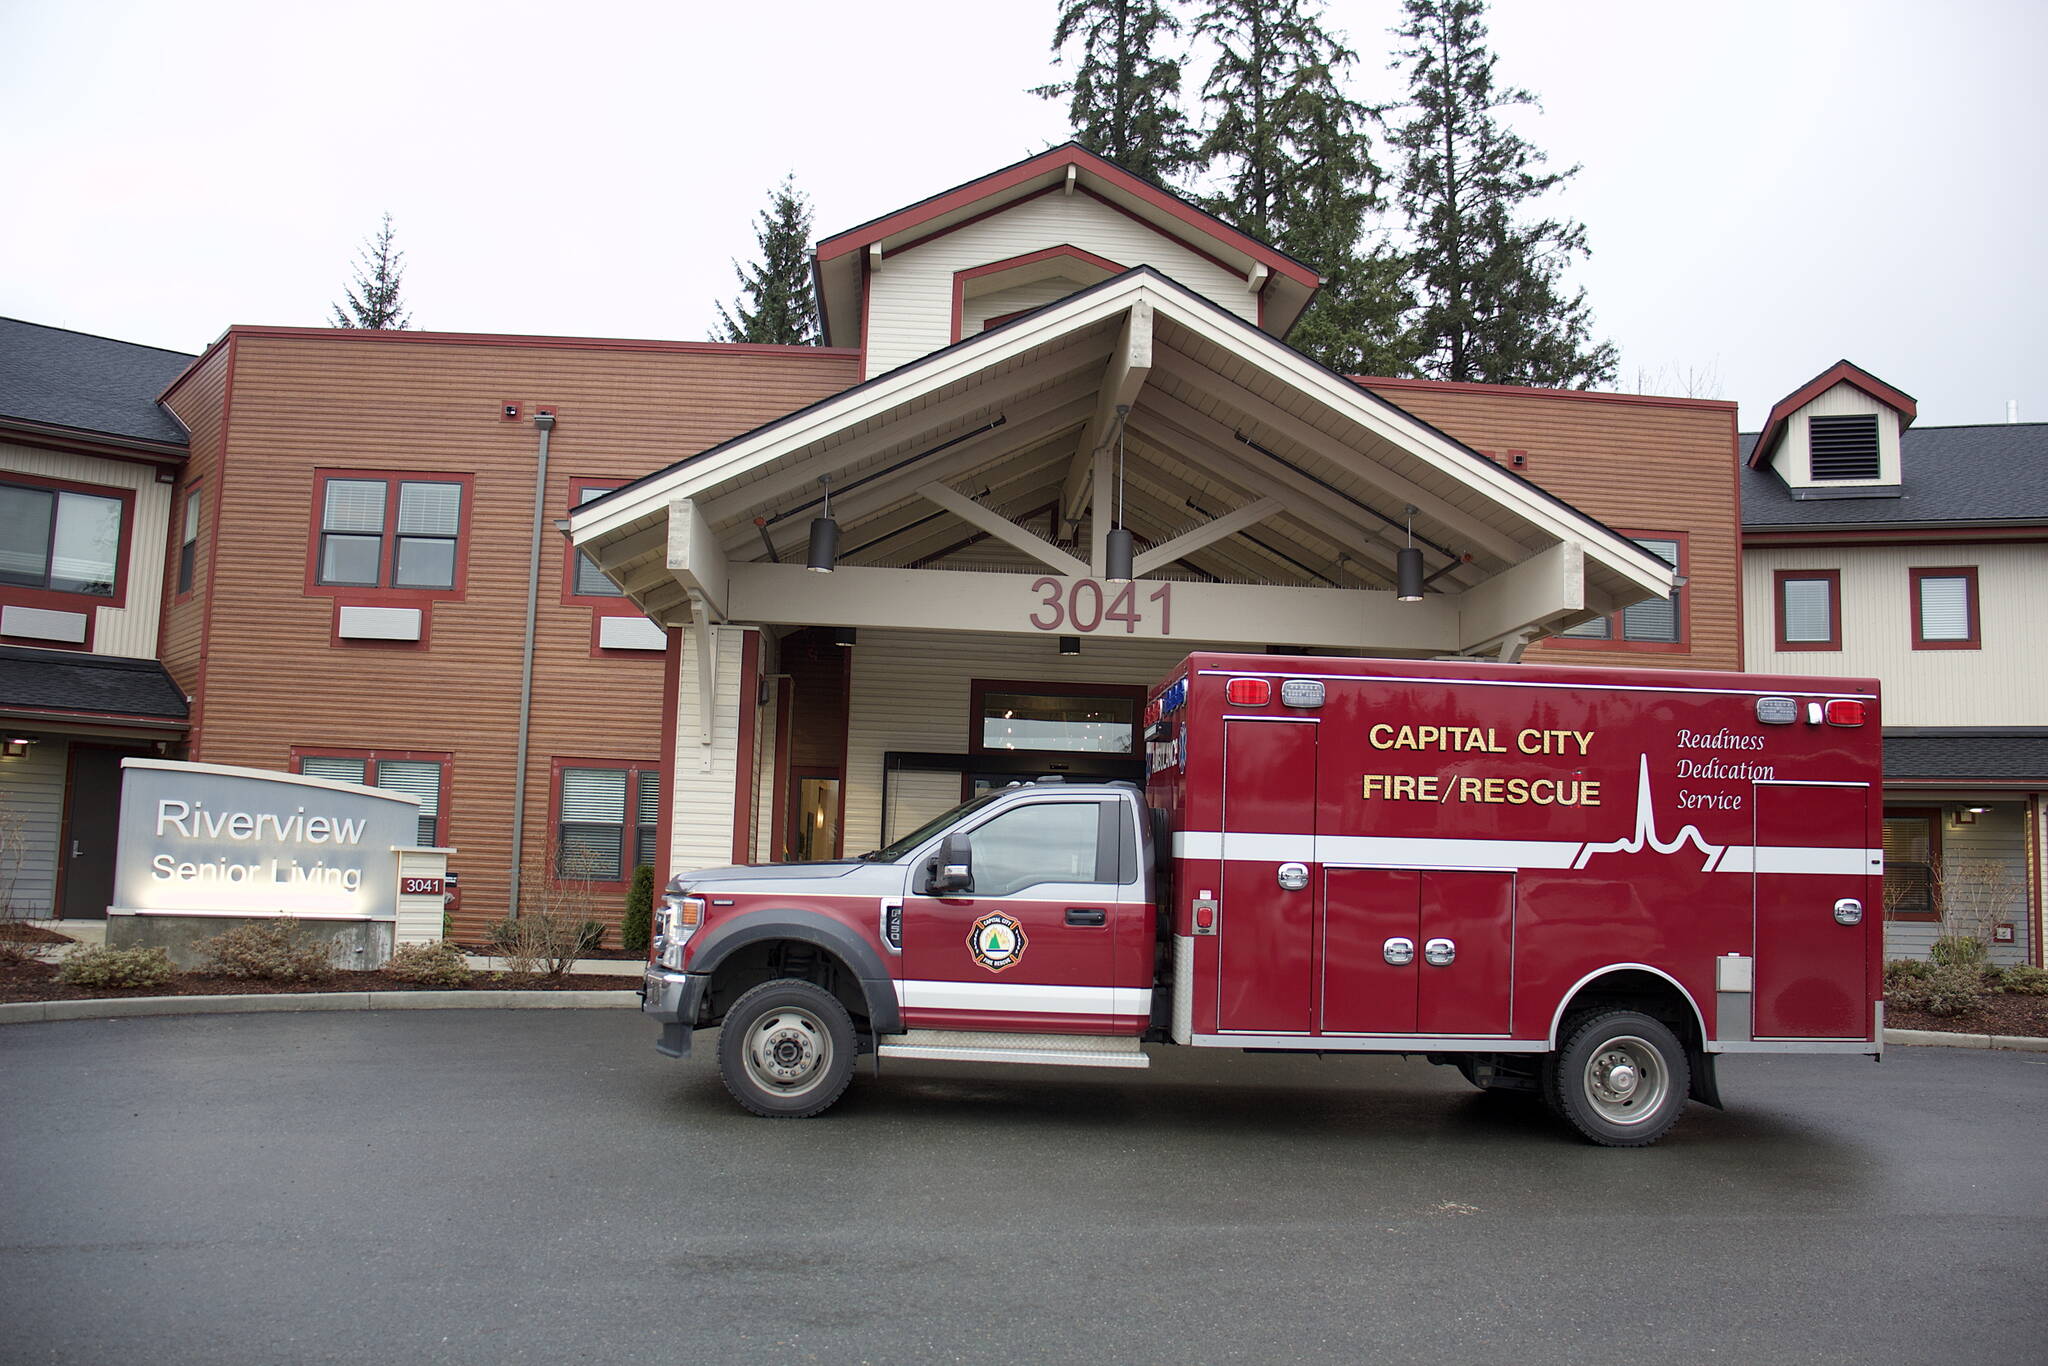 A Capital City Fire/Rescue truck parks outside the main entrance of the Riverview Senior Living complex Monday after Nathan Bishop, 58, is found alive in the attic 40 hours after being reported missing from the facility where he is a resident. (Mark Sabbatini / Juneau Empire)